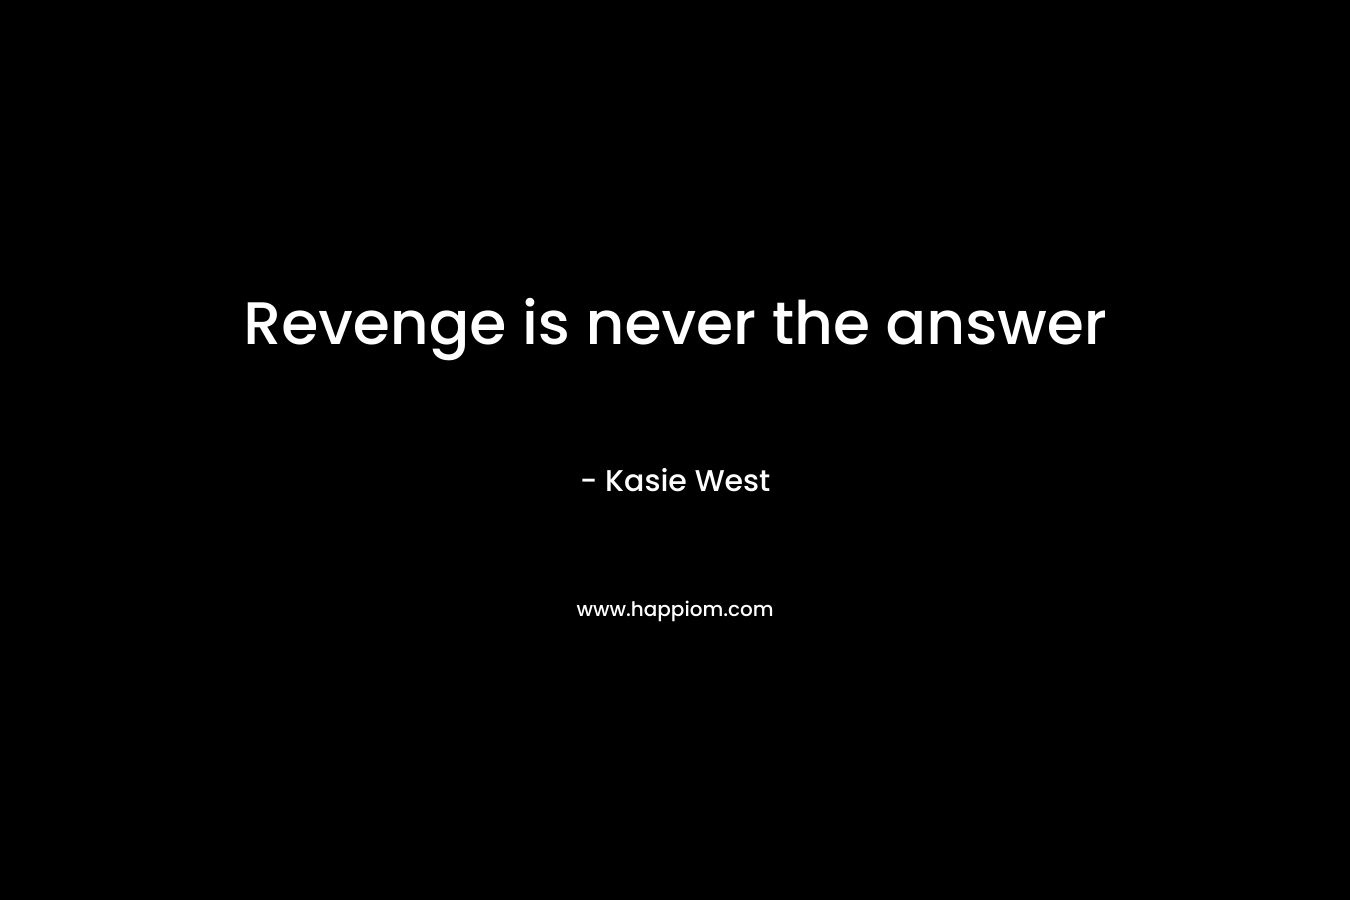 Revenge is never the answer – Kasie West